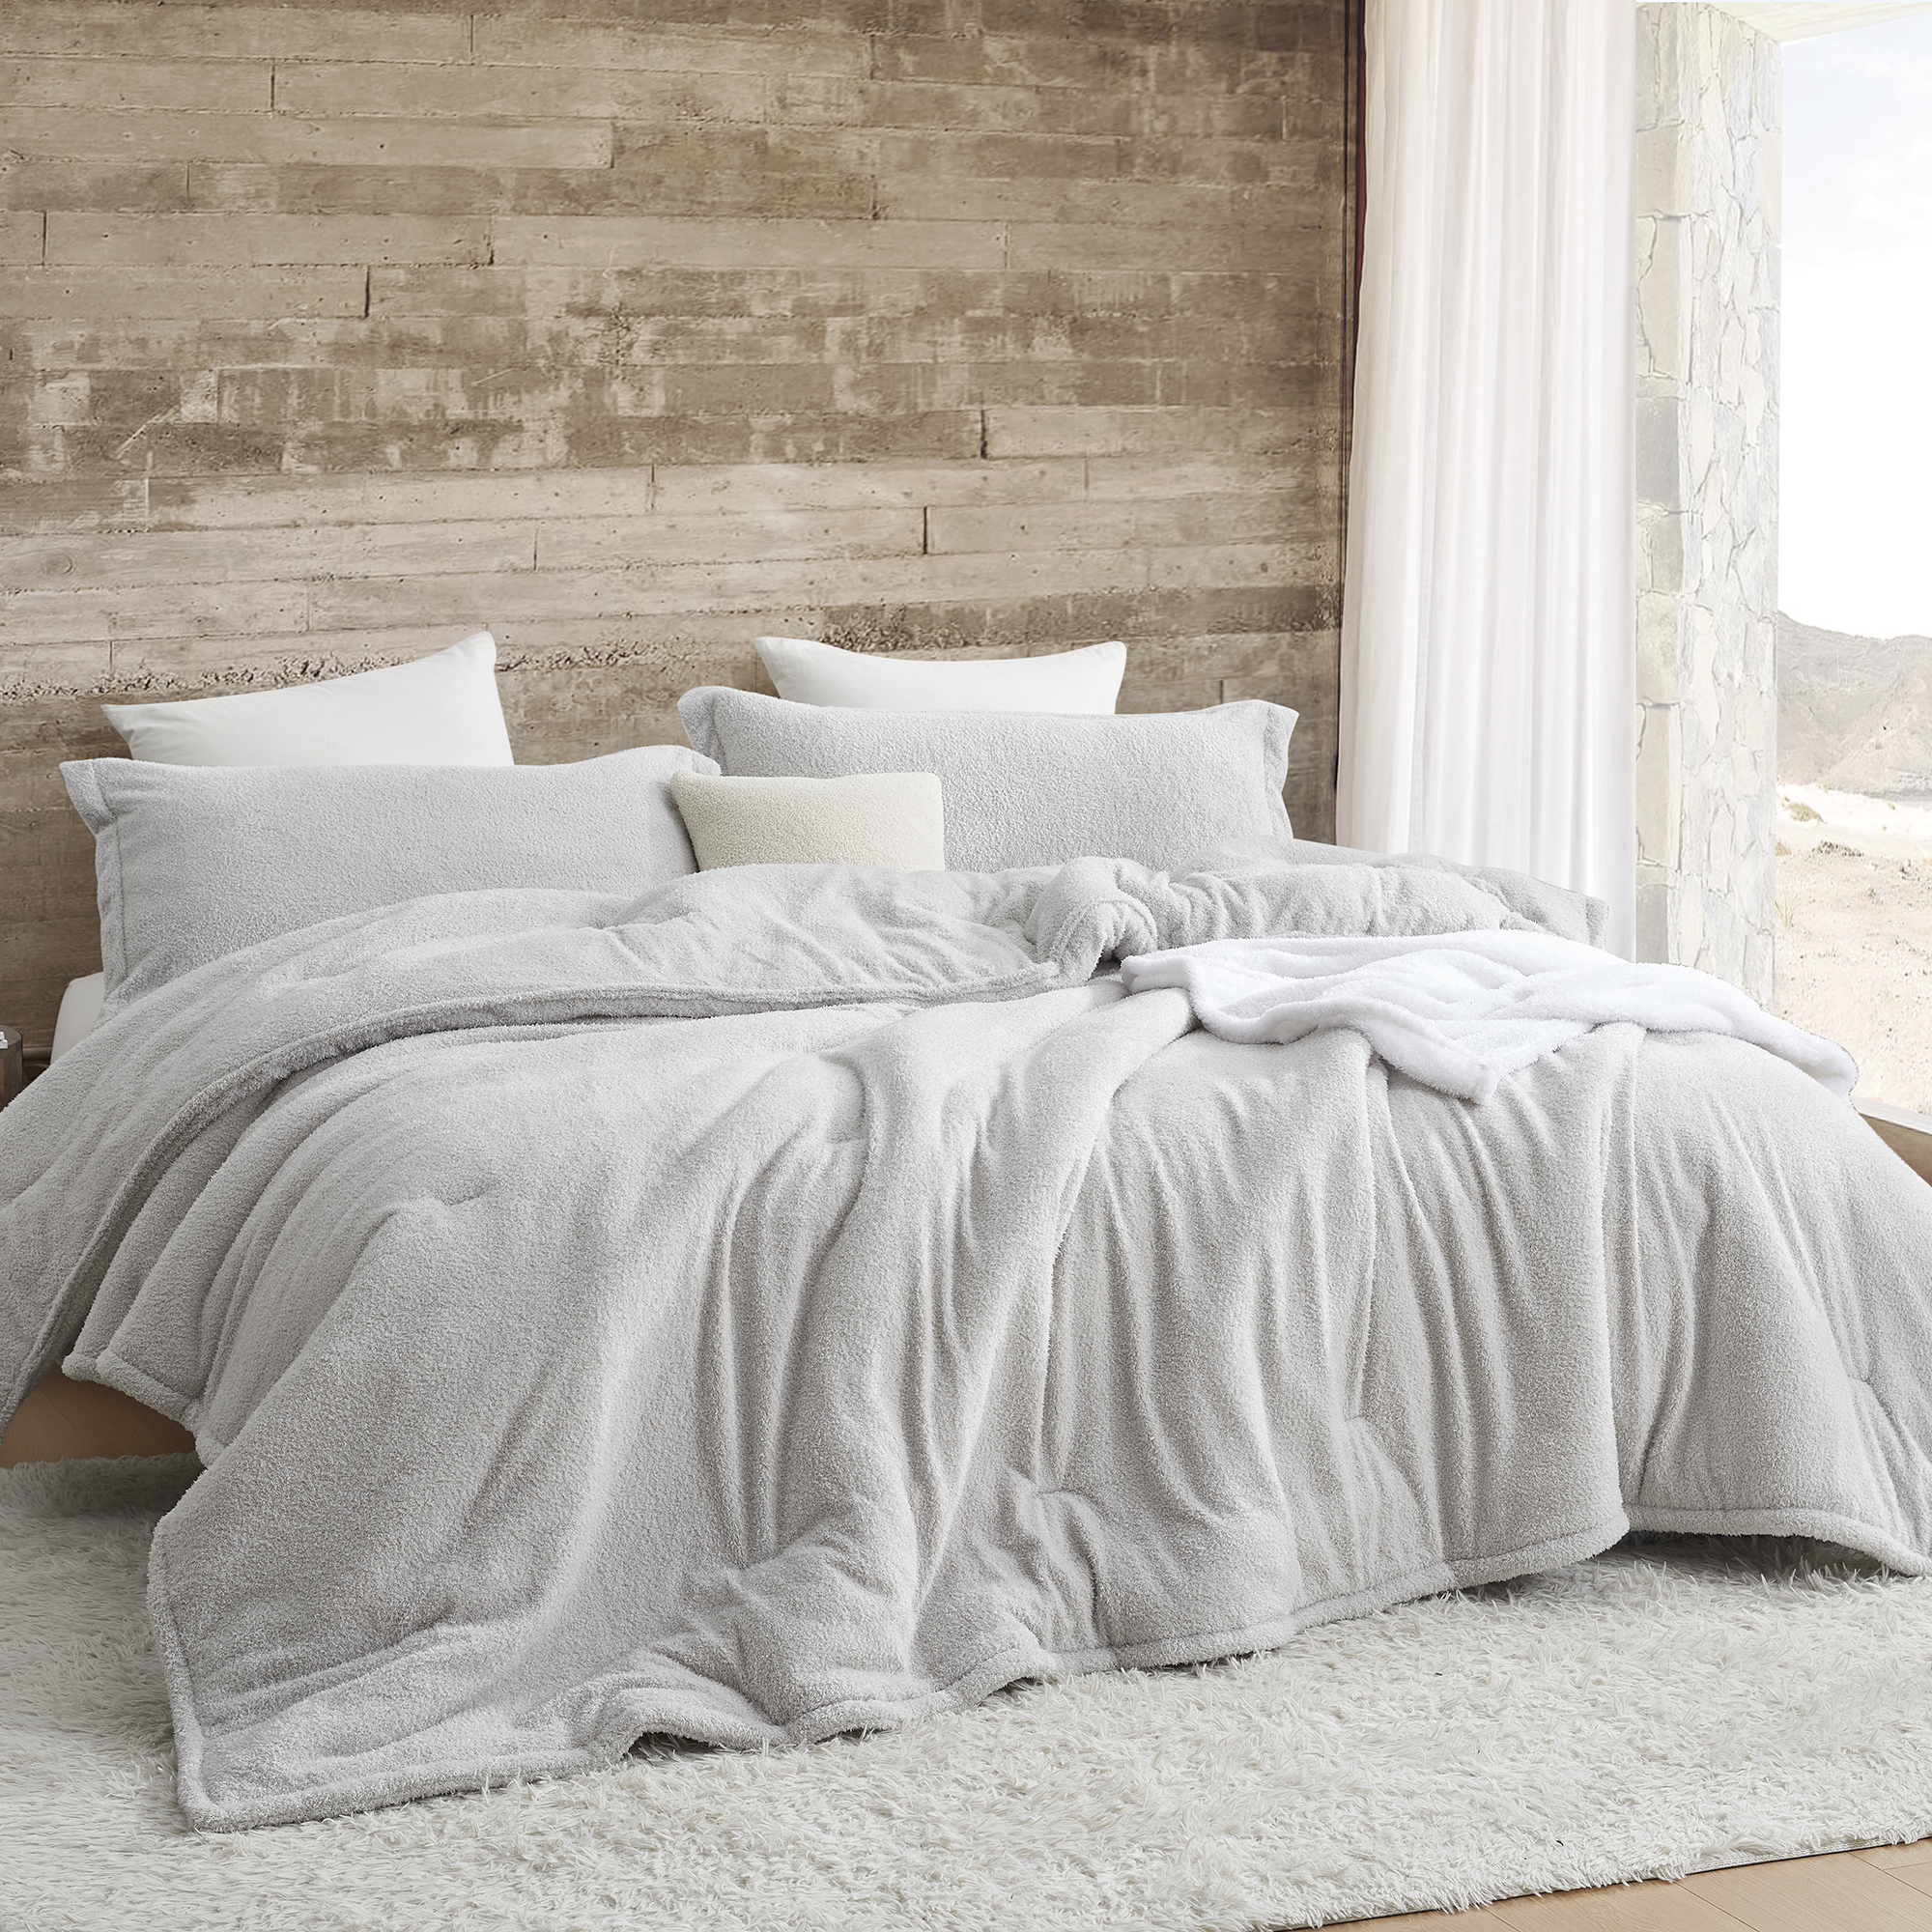 Cozy Moody - Coma Inducer® Oversized King Comforter - Light Gray